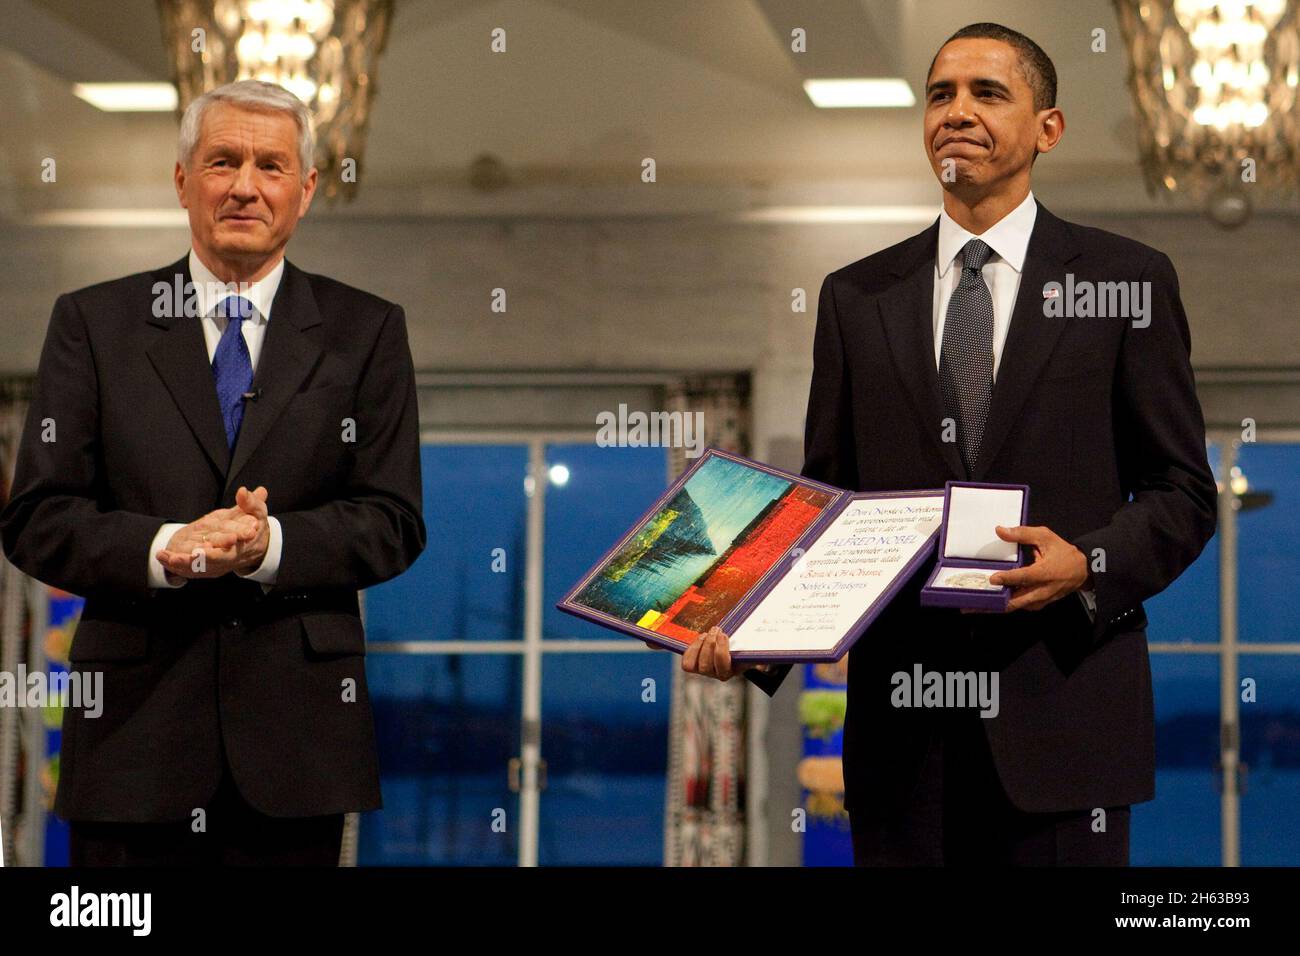 Nobel Committee Chairman Thorbjorn Jagland presents President Barack Obama with the Nobel Prize medal and diploma during the Nobel Peace Prize ceremony in Raadhuset Main Hall at Oslo City Hall in Oslo, Norway, Dec. 10, 2009. Stock Photo